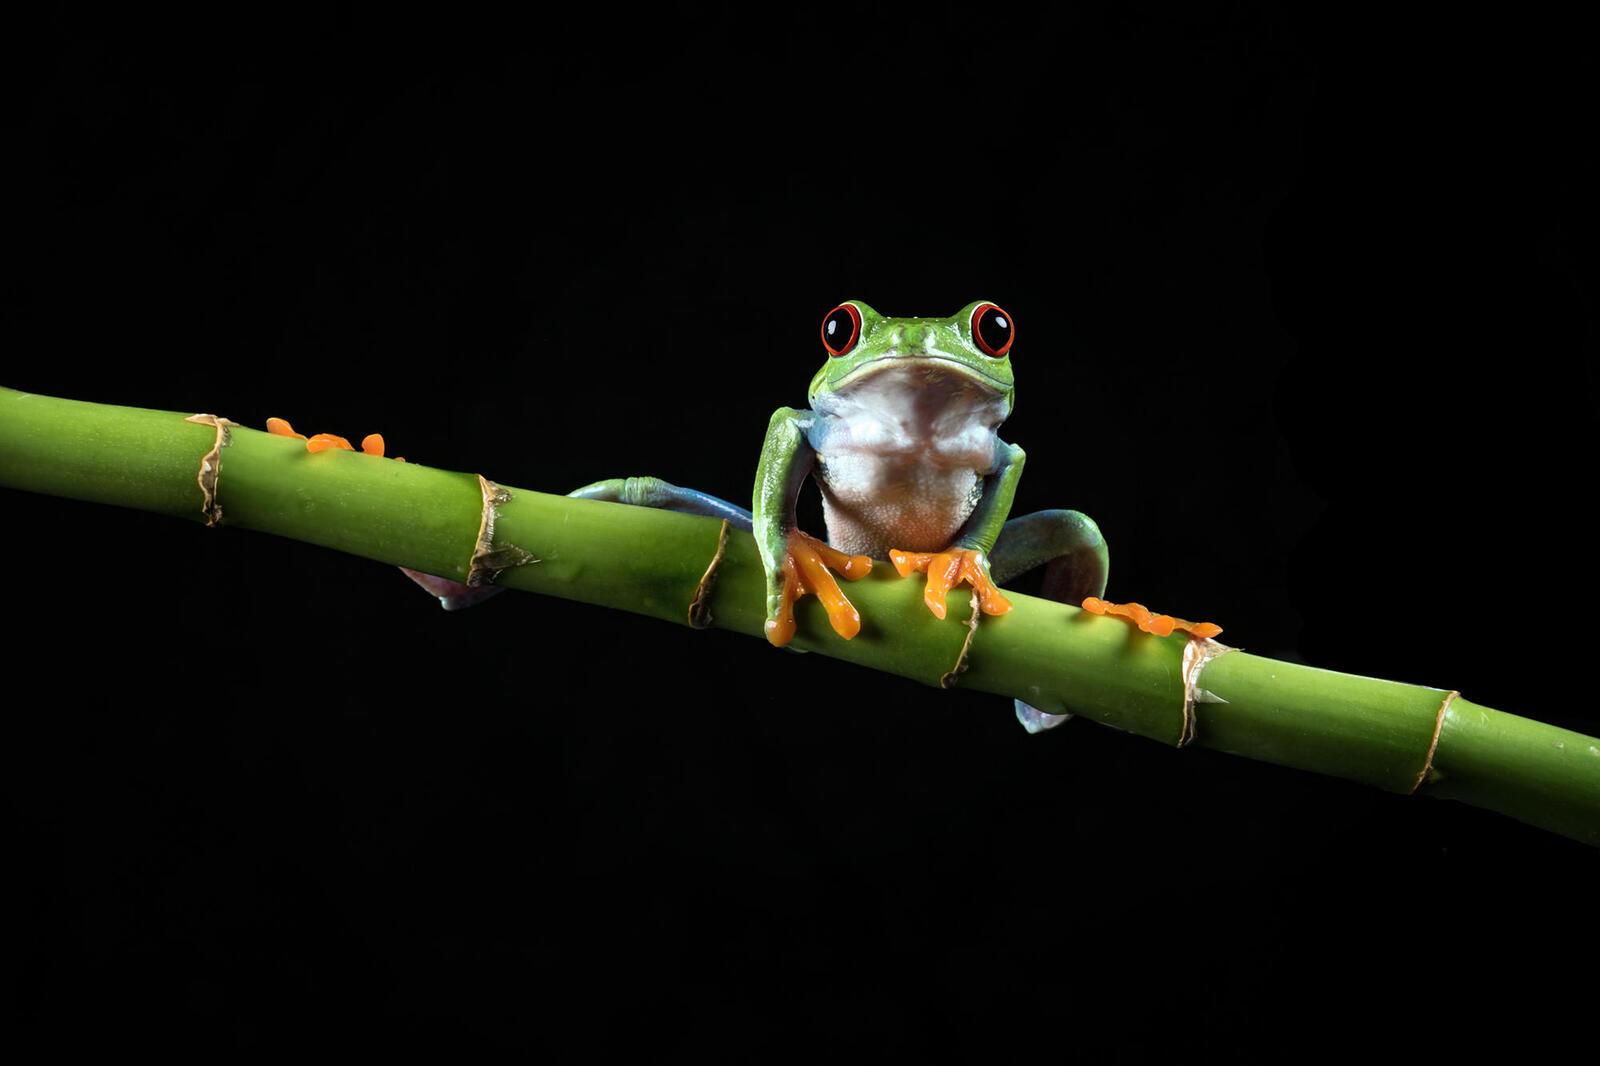 Wallpapers frog long branch bamboo on the desktop